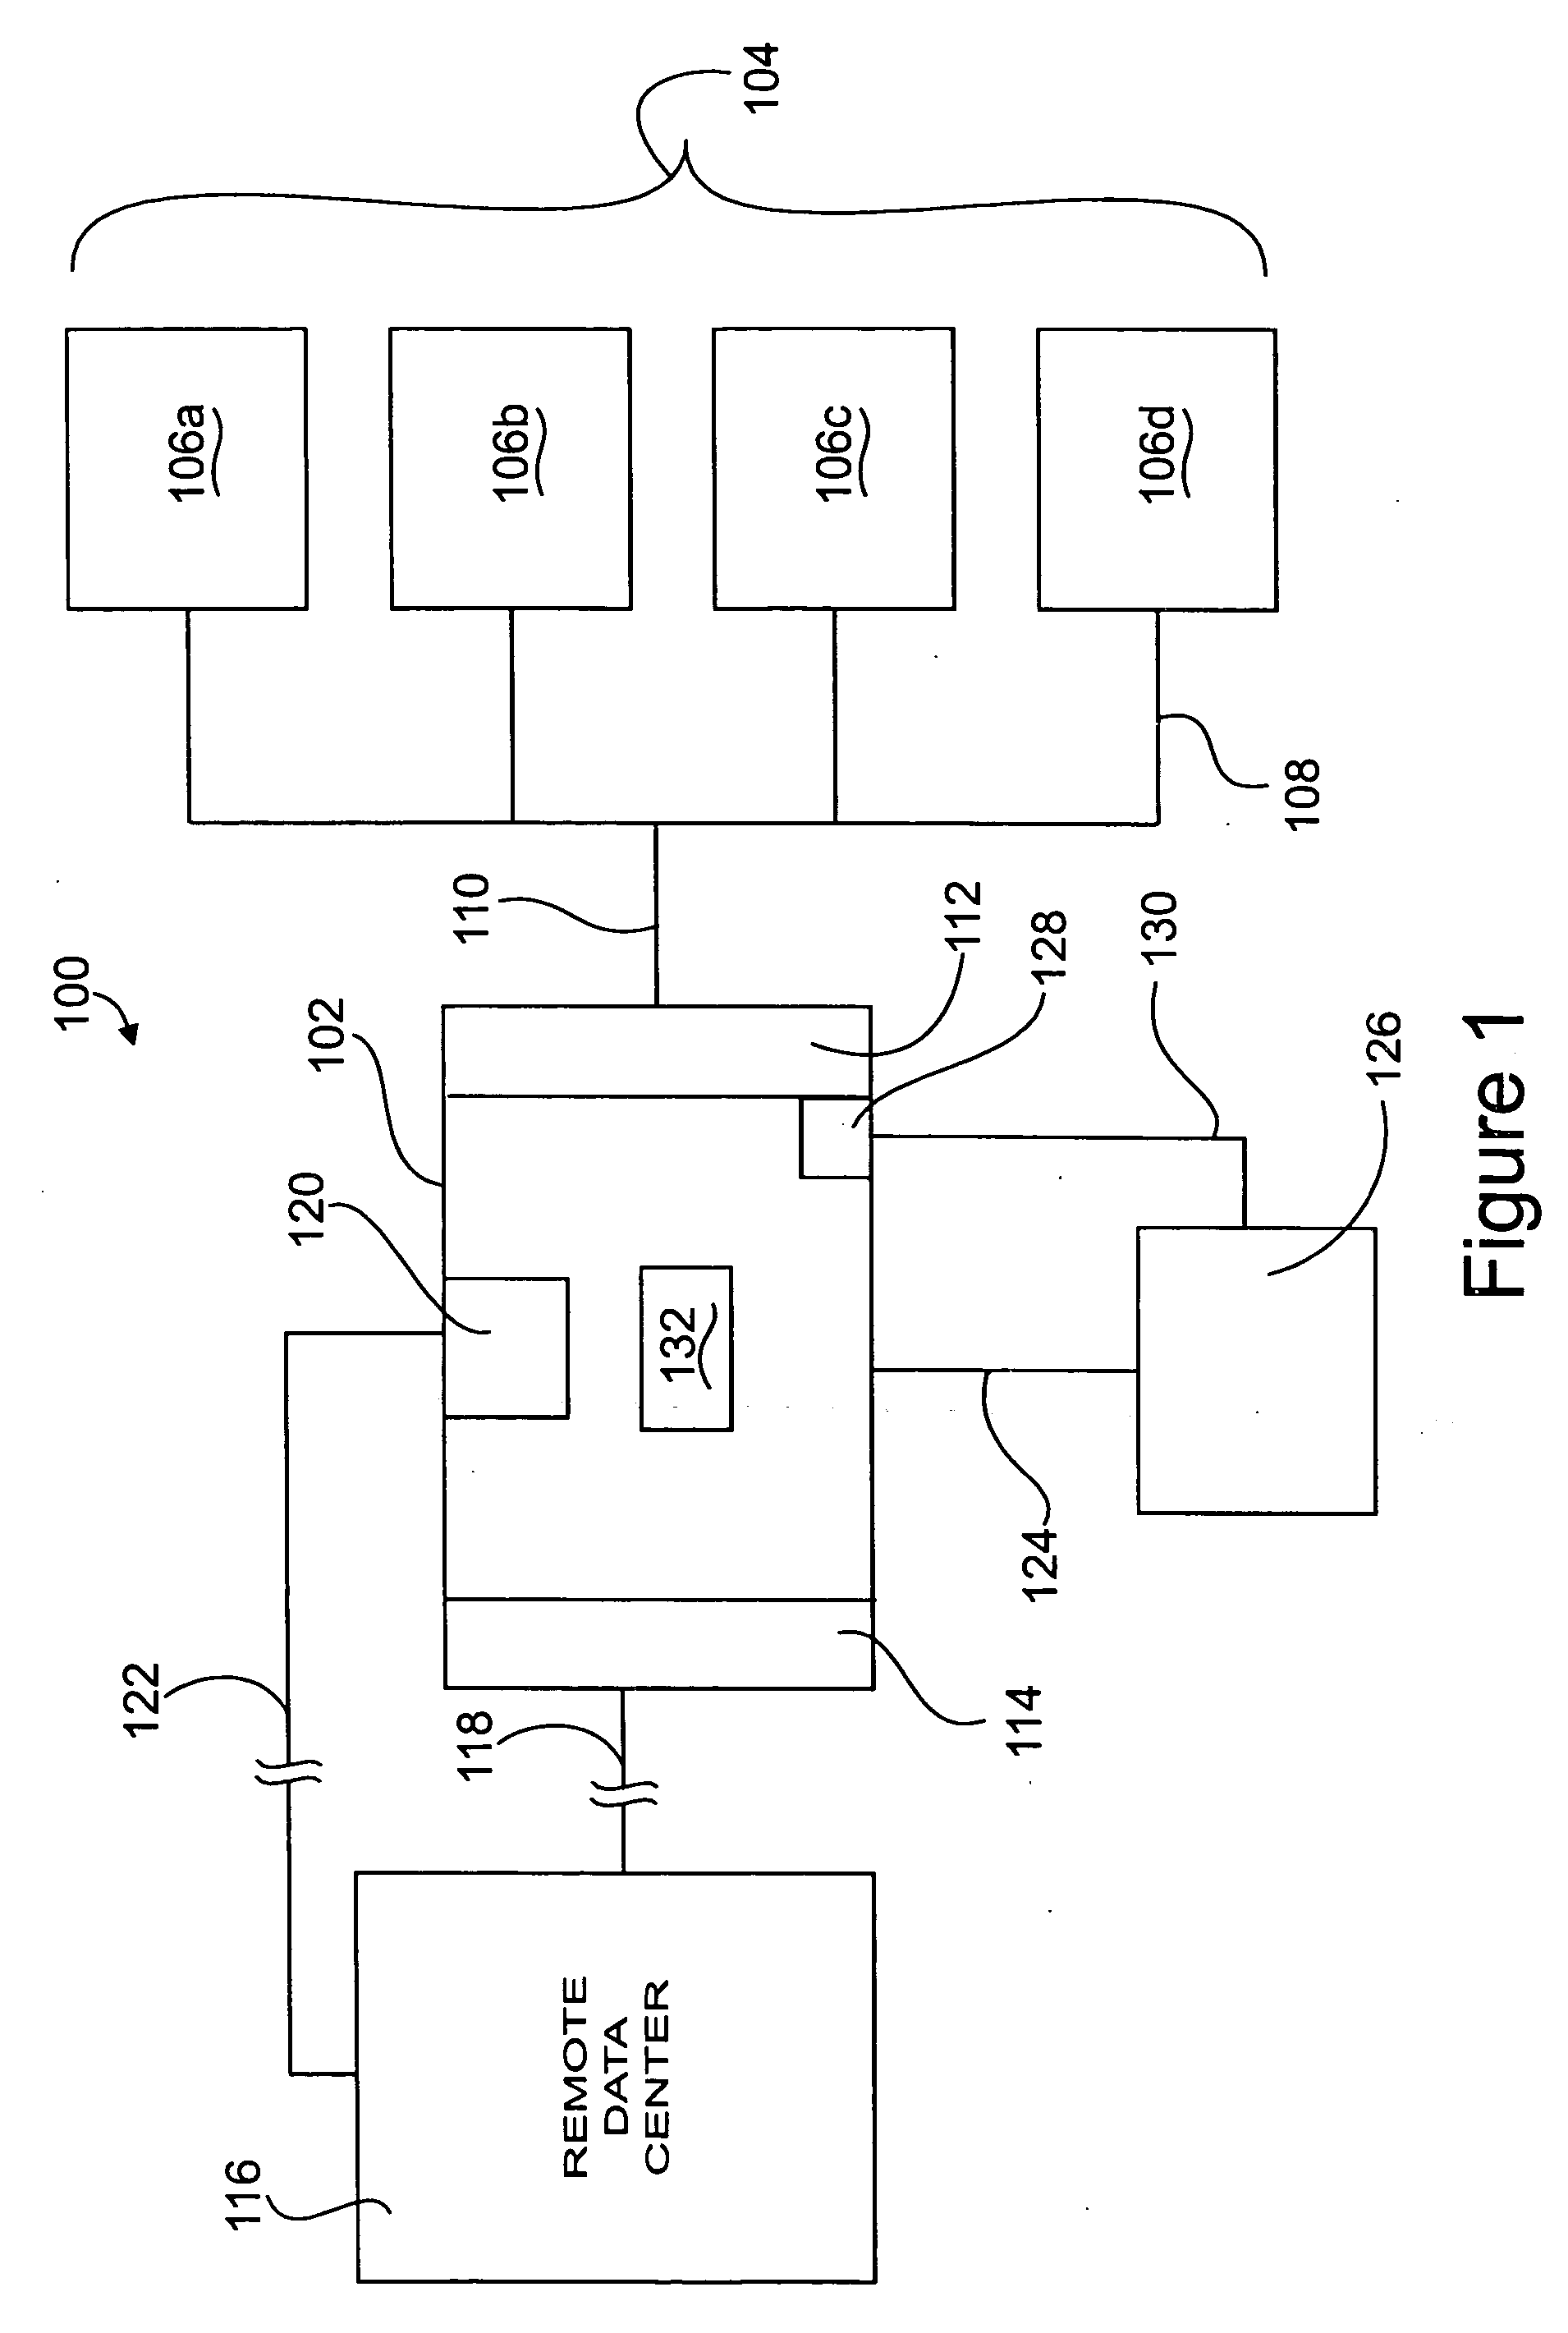 Apparatus and method for remotely monitoring a computer network